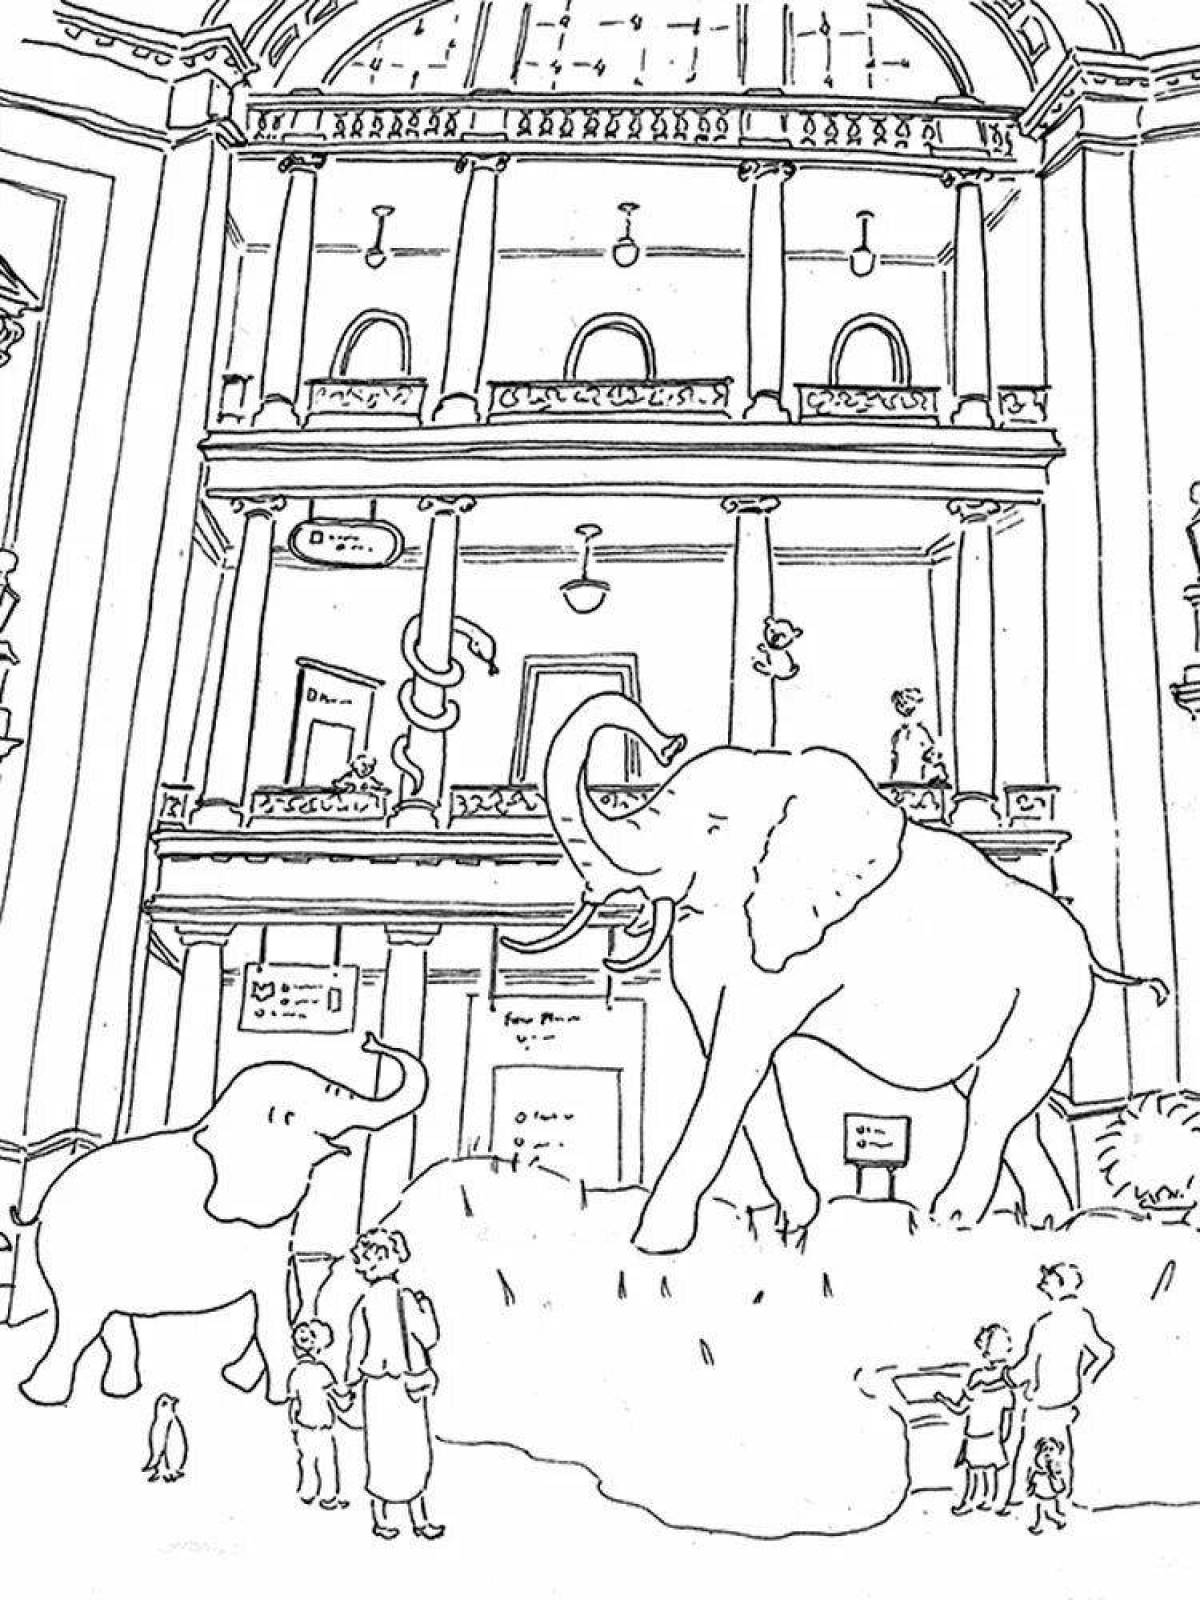 Dazzling museum coloring pages